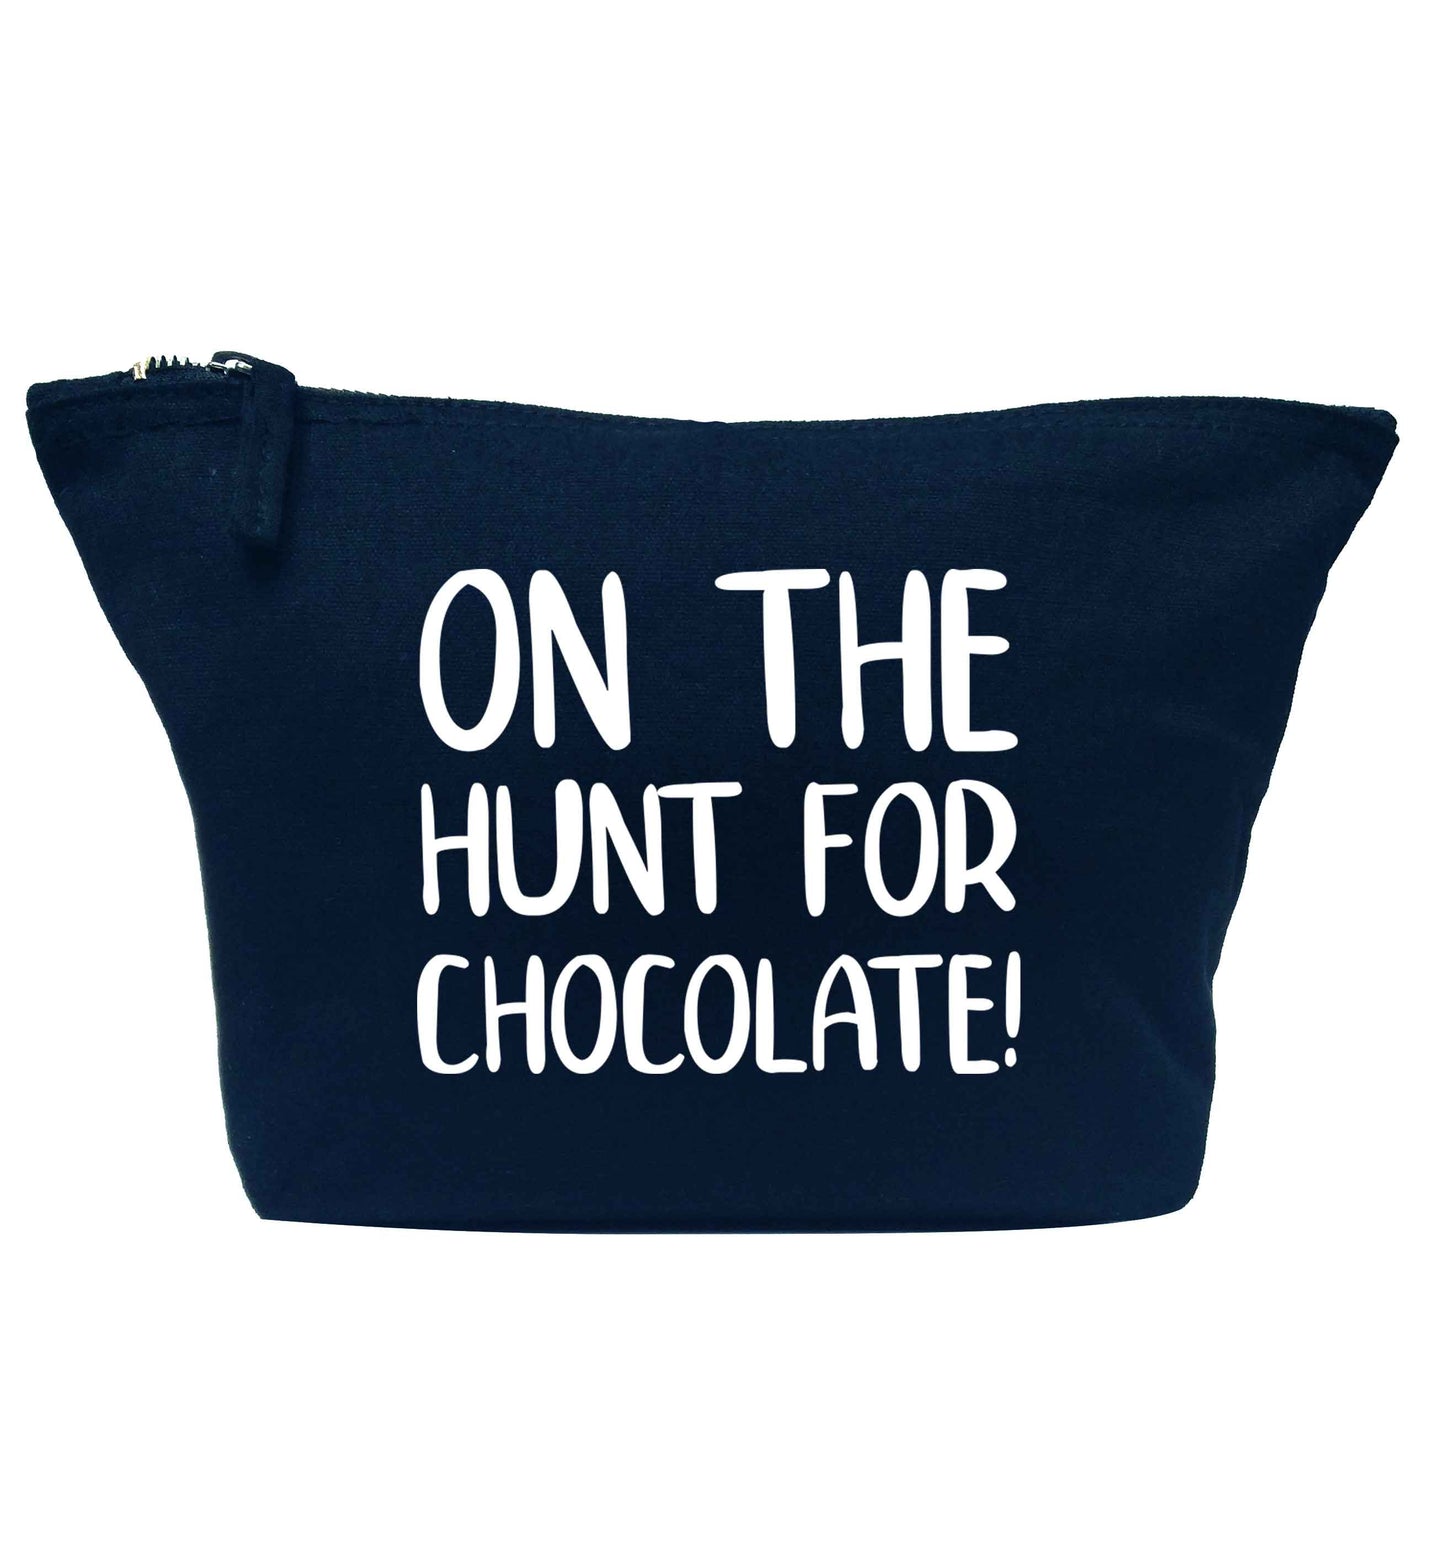 On the hunt for chocolate! navy makeup bag